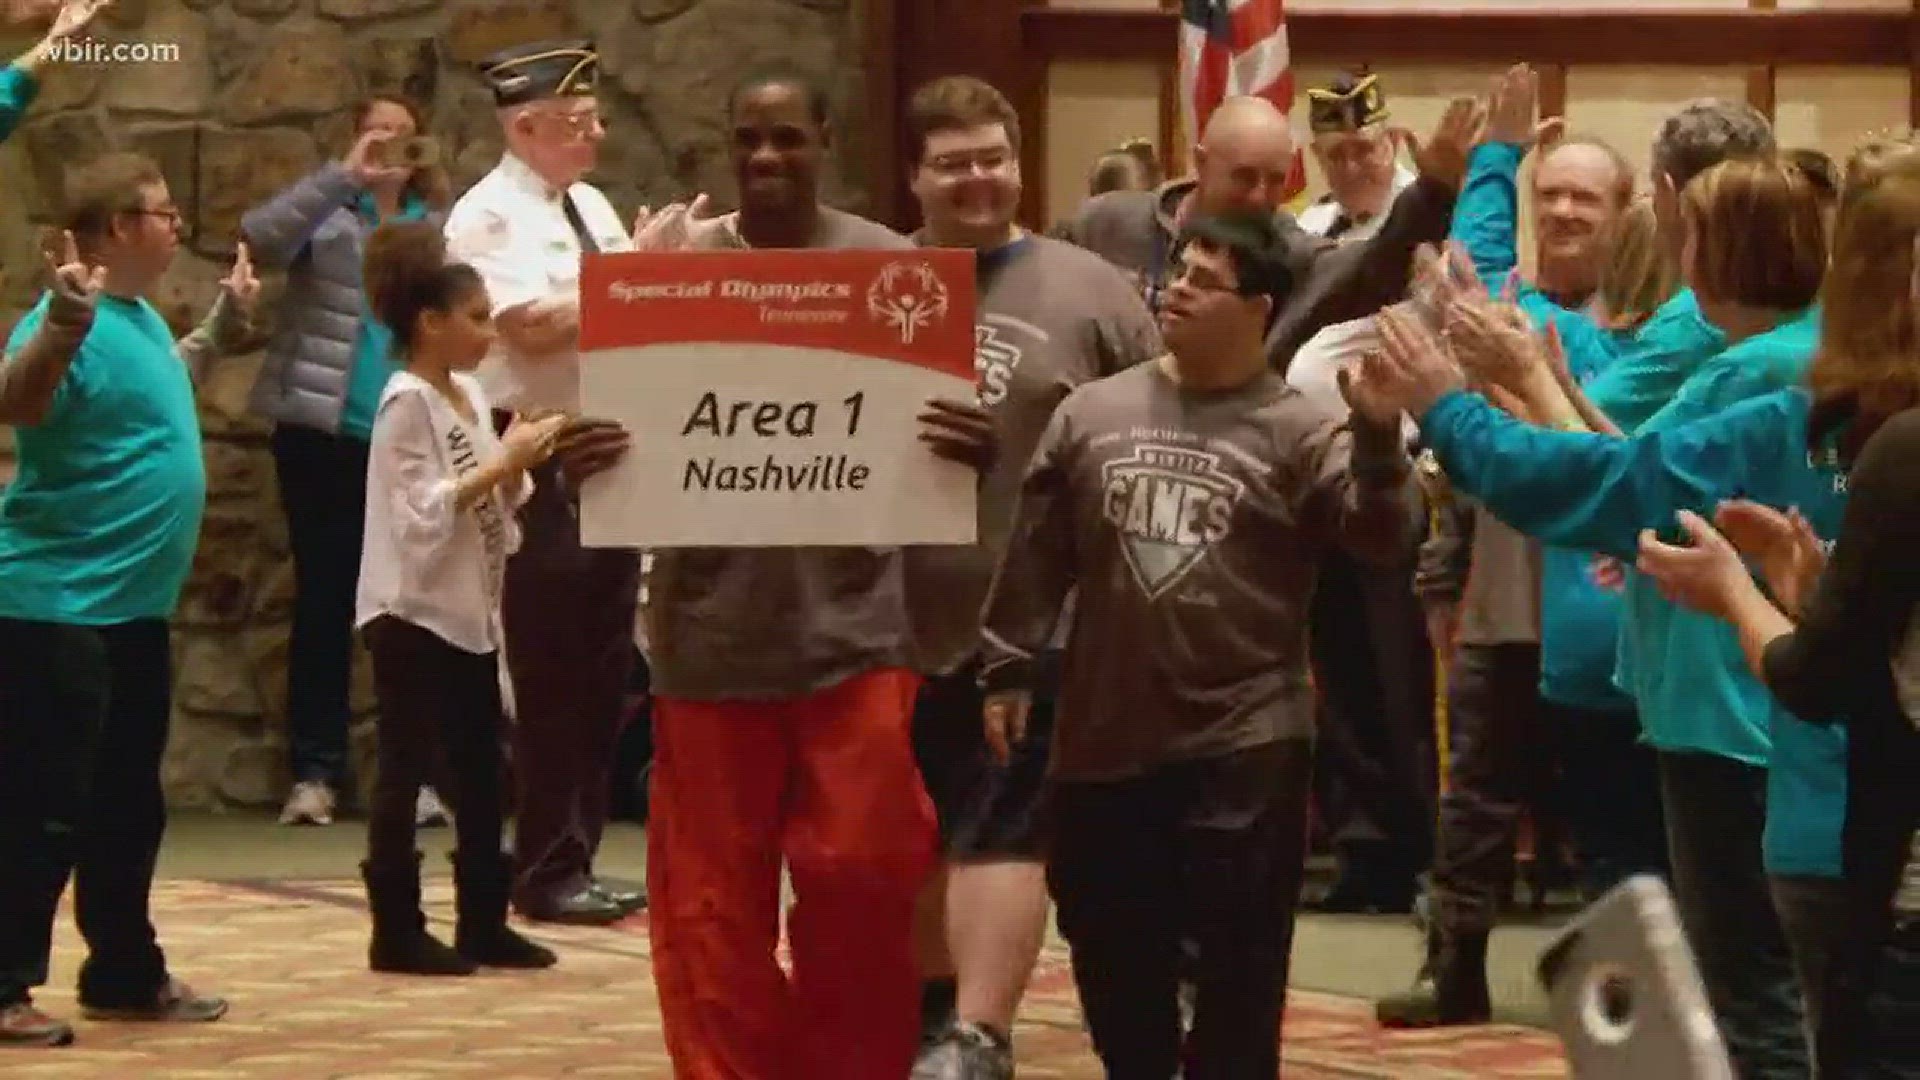 Like each gathering of the Olympic games, the special Tennessee special Olympics winter games kicked off with an opening ceremony.